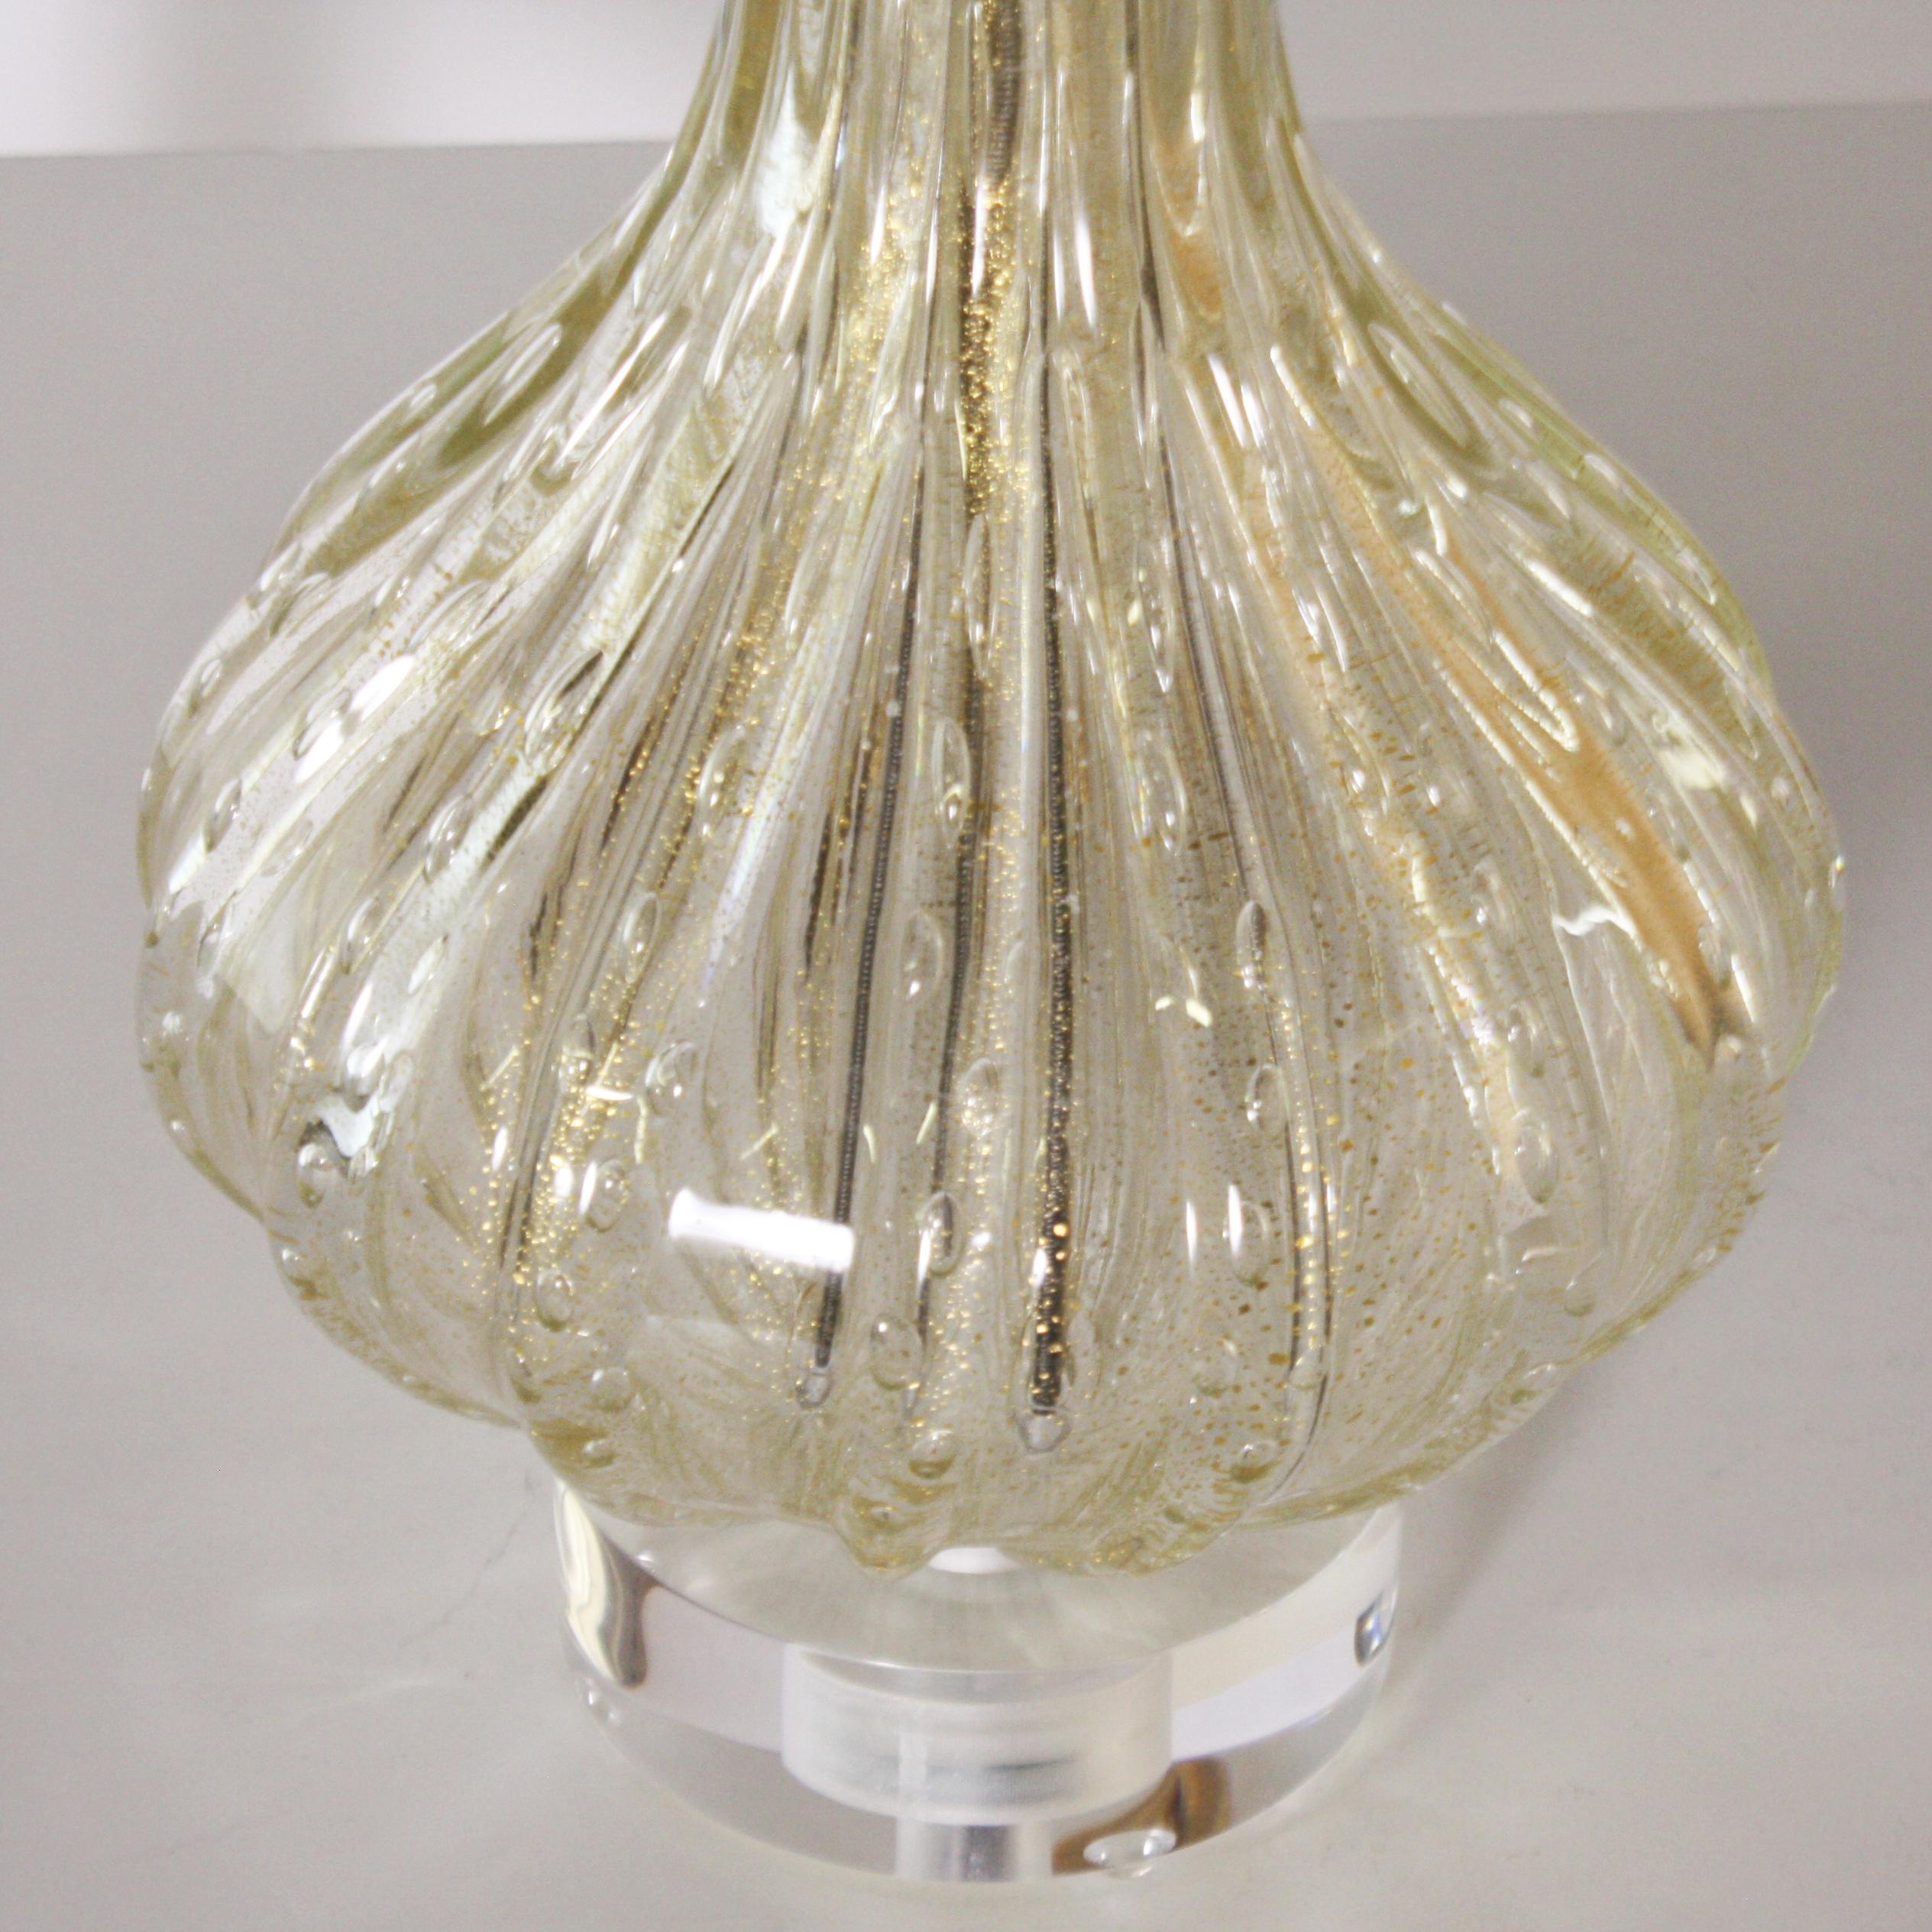 Gold Barovier lamp with clear inclusions, circa 1960.
Measures: 14” diameter x 28” height.